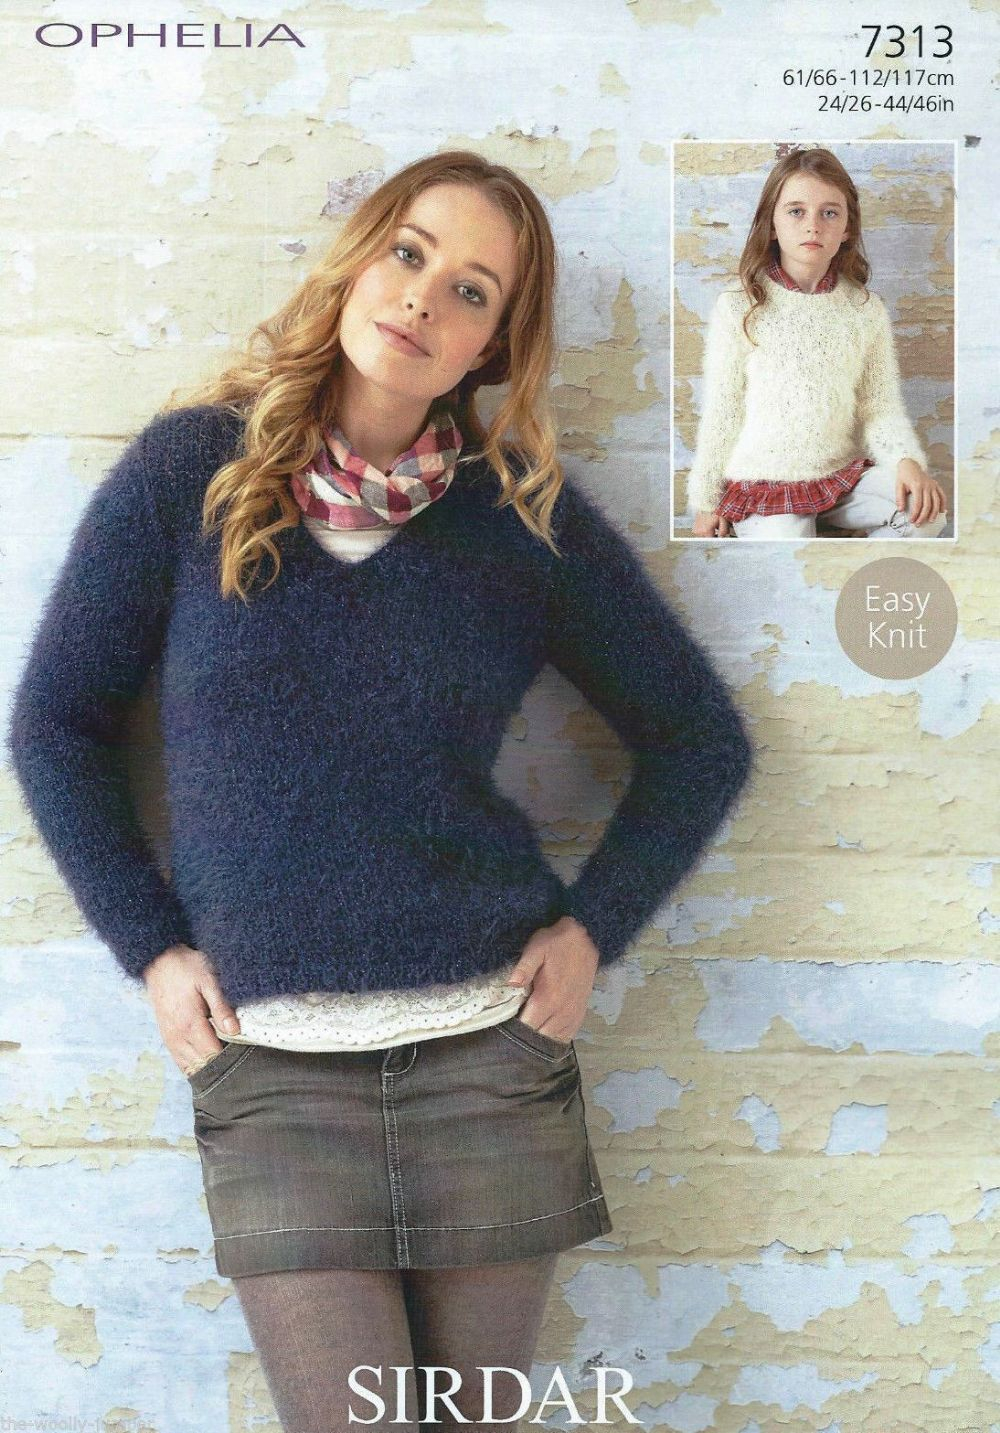 Knit Sweaters Patterns 7313 Sirdar Ophelia Chunky Easy Knit Sweater Knitting Pattern To Fit 24 To 46